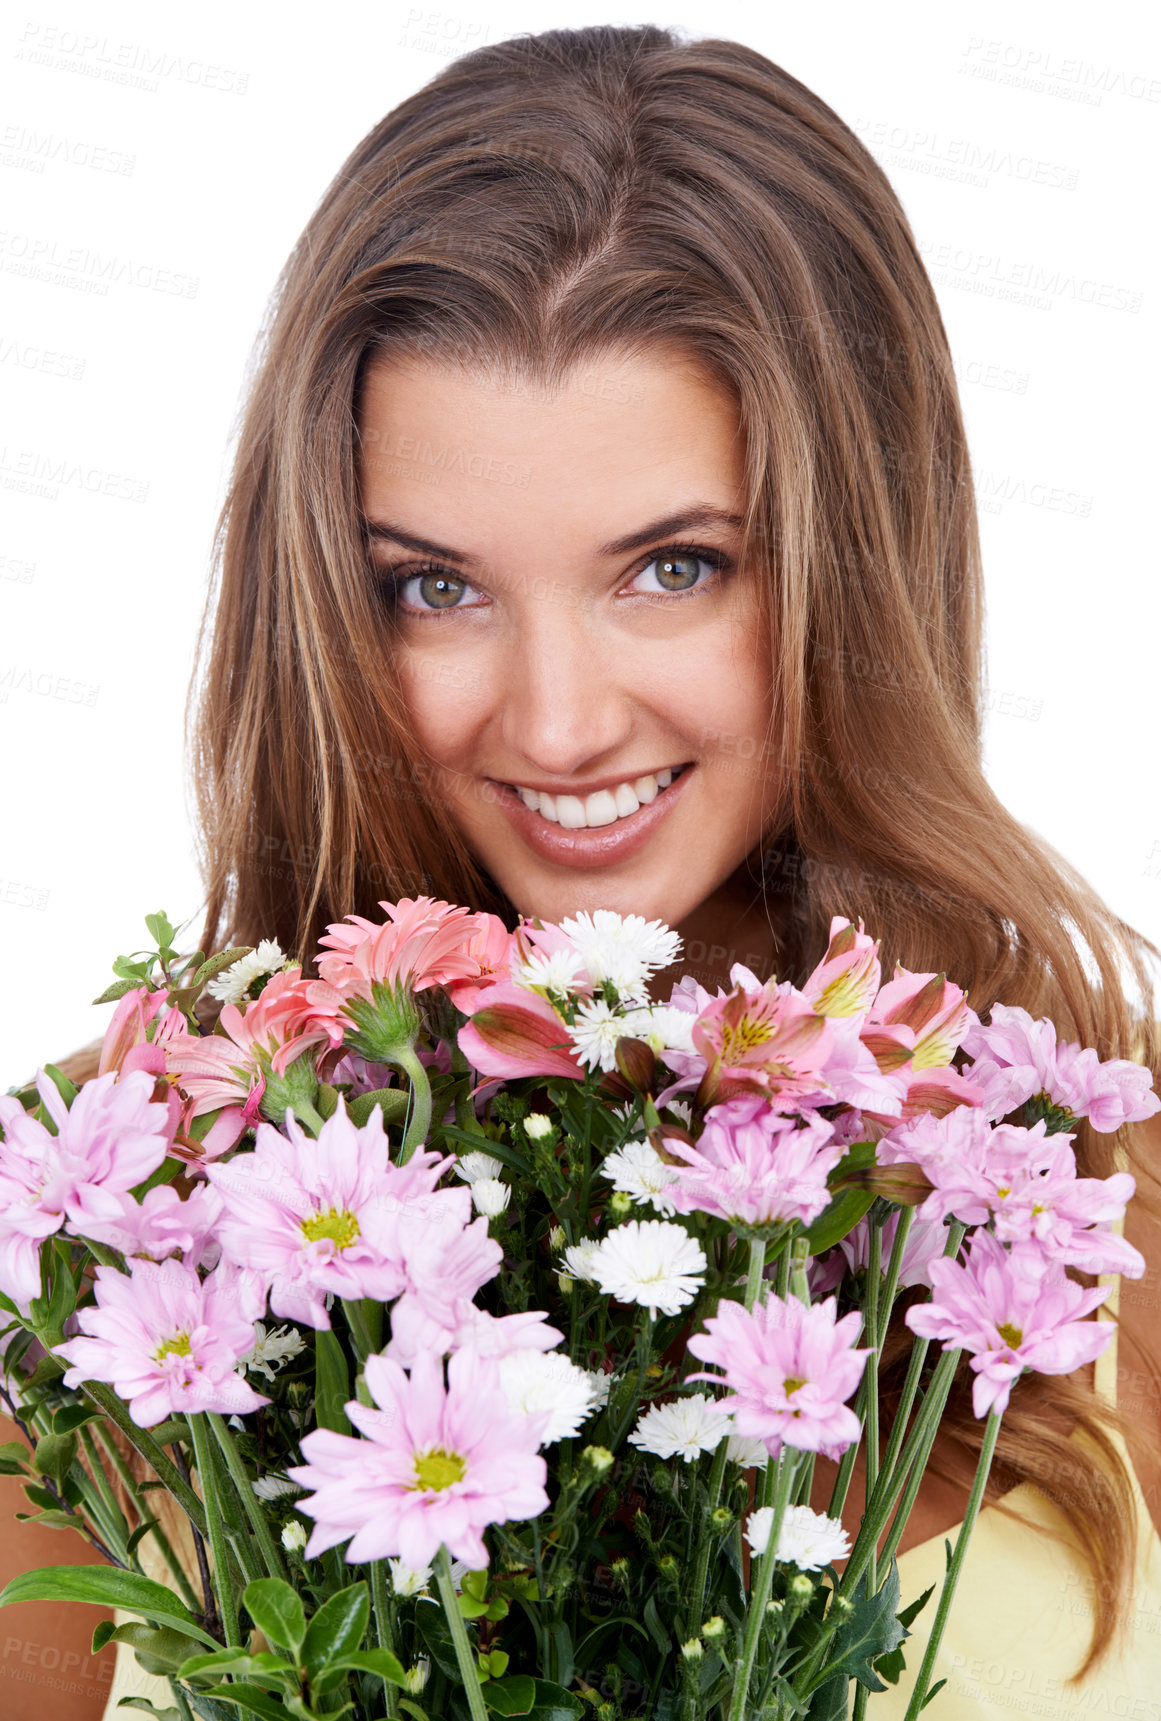 Buy stock photo Studio shot of an attractive woman holding a bouquet of flowers